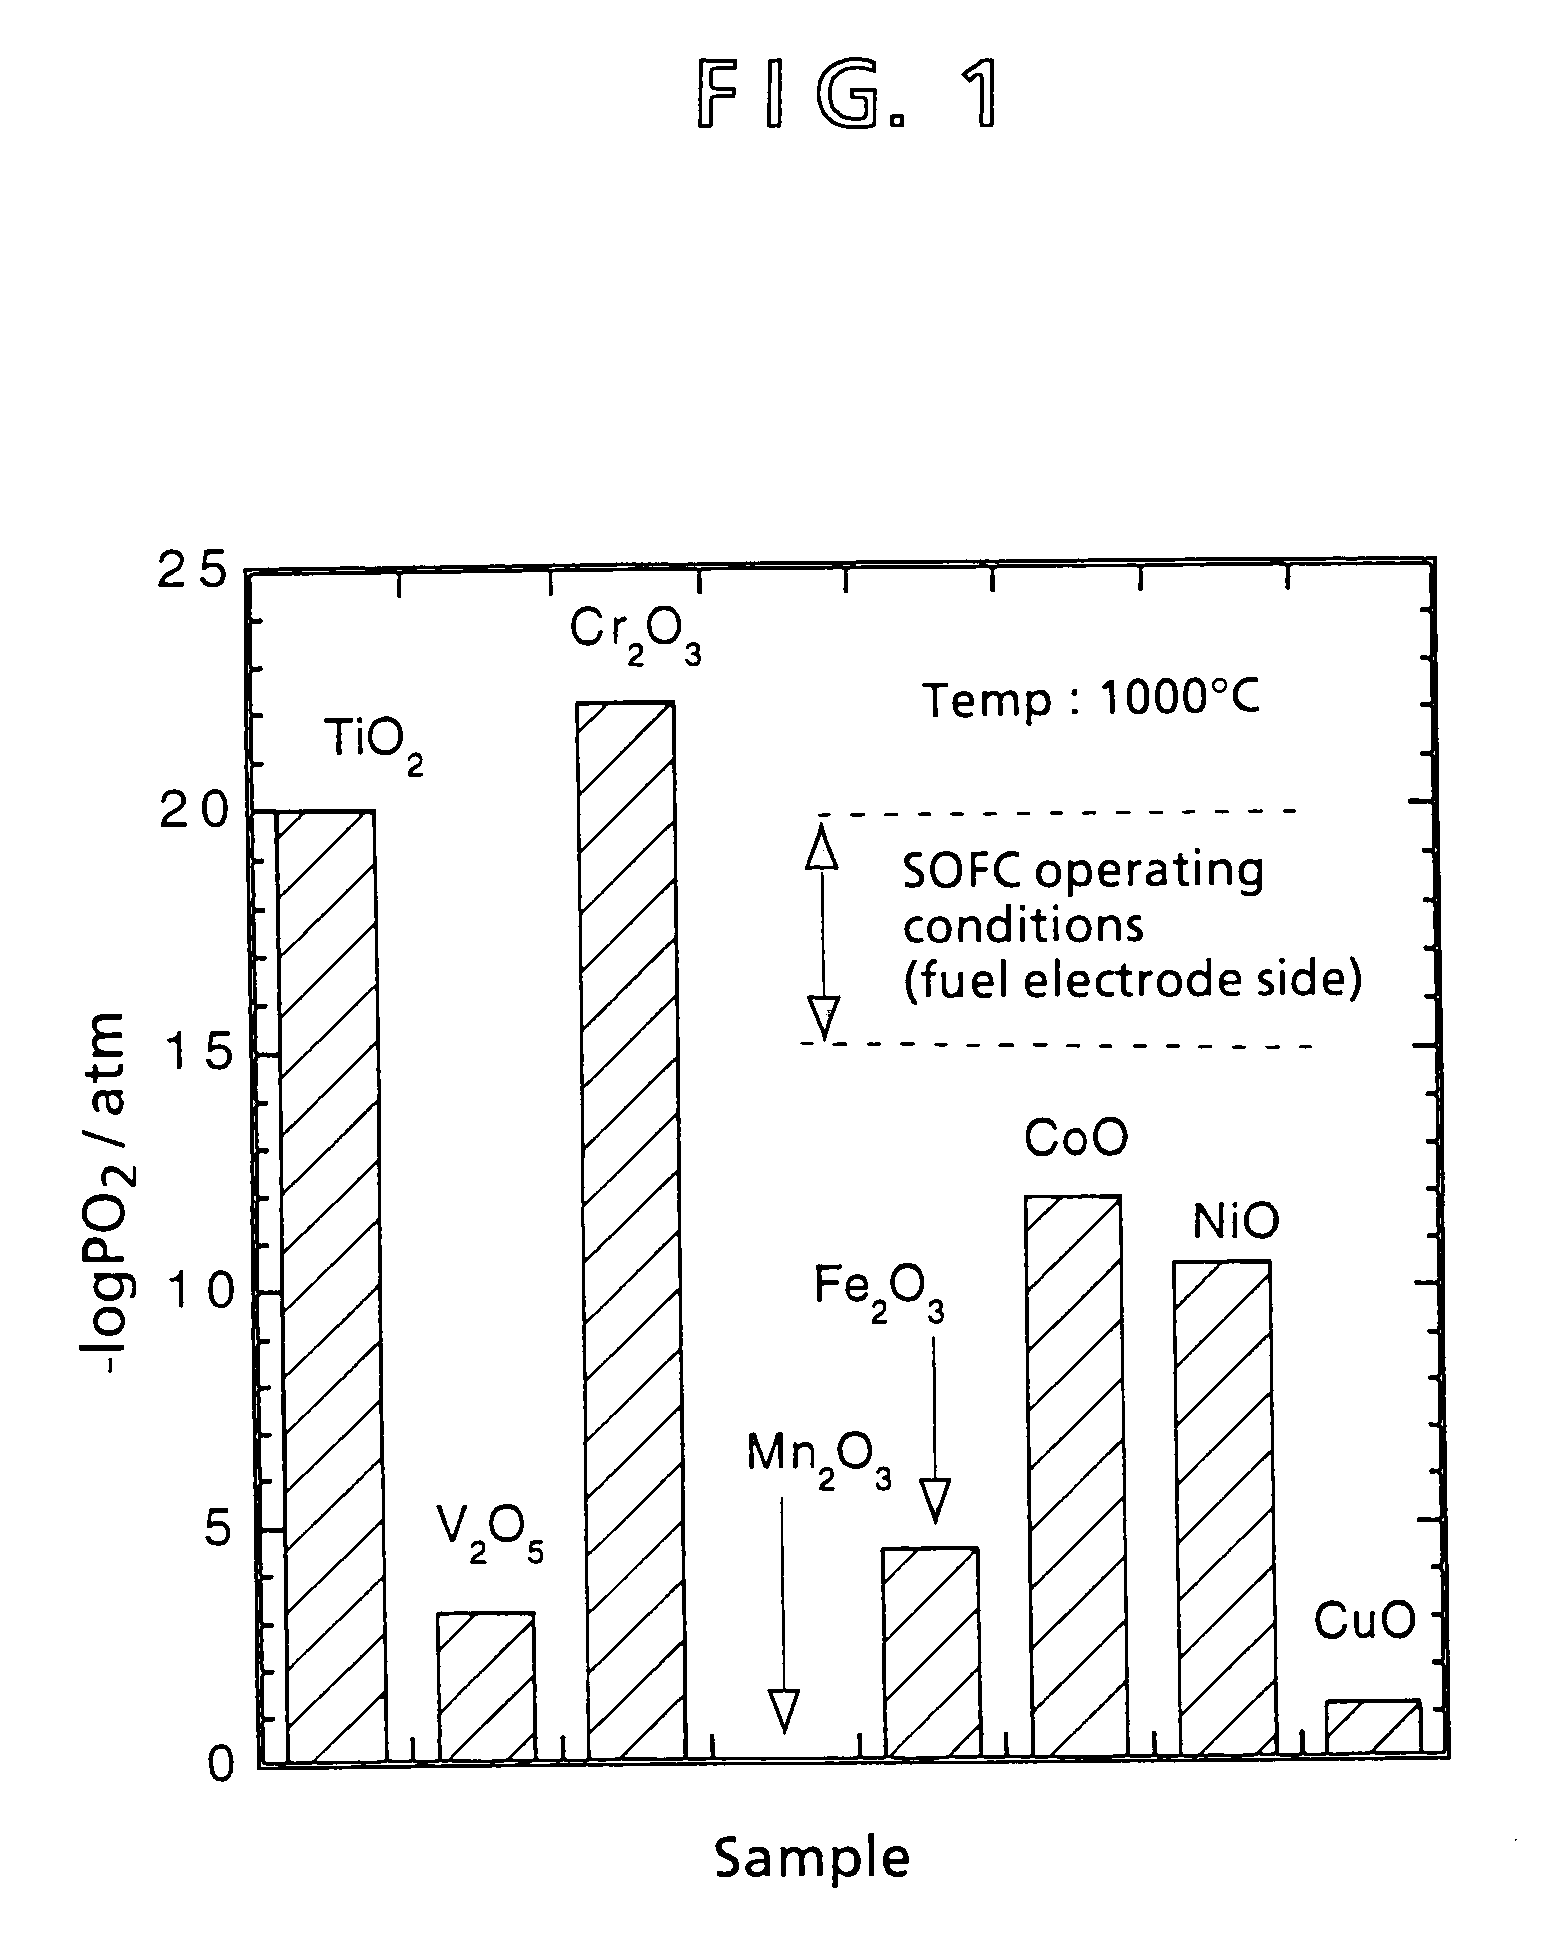 Solid electrolyte type fuel battery